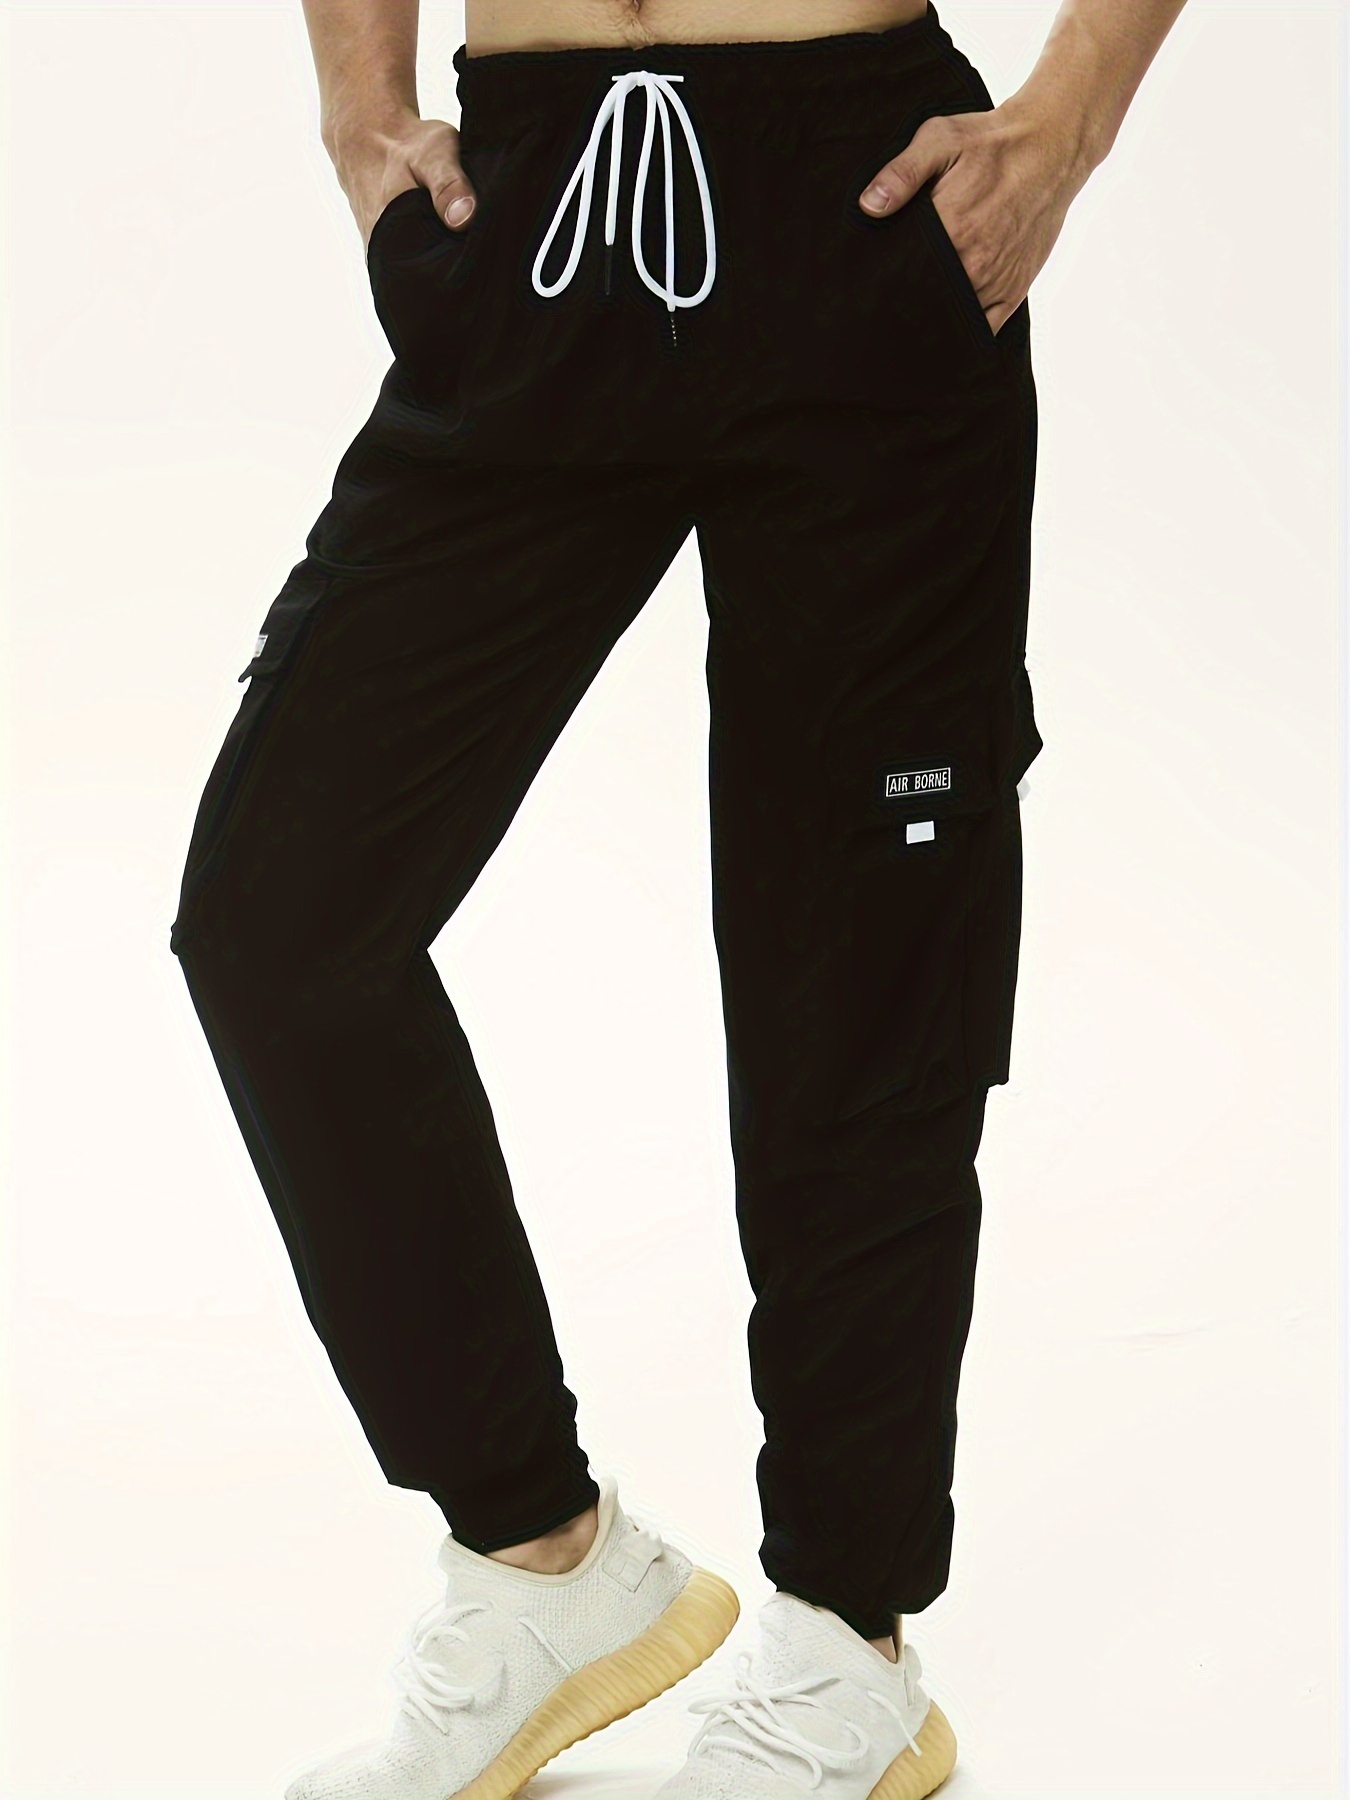 Cotton sweatpants with drawstring - Pants - BSK Teen